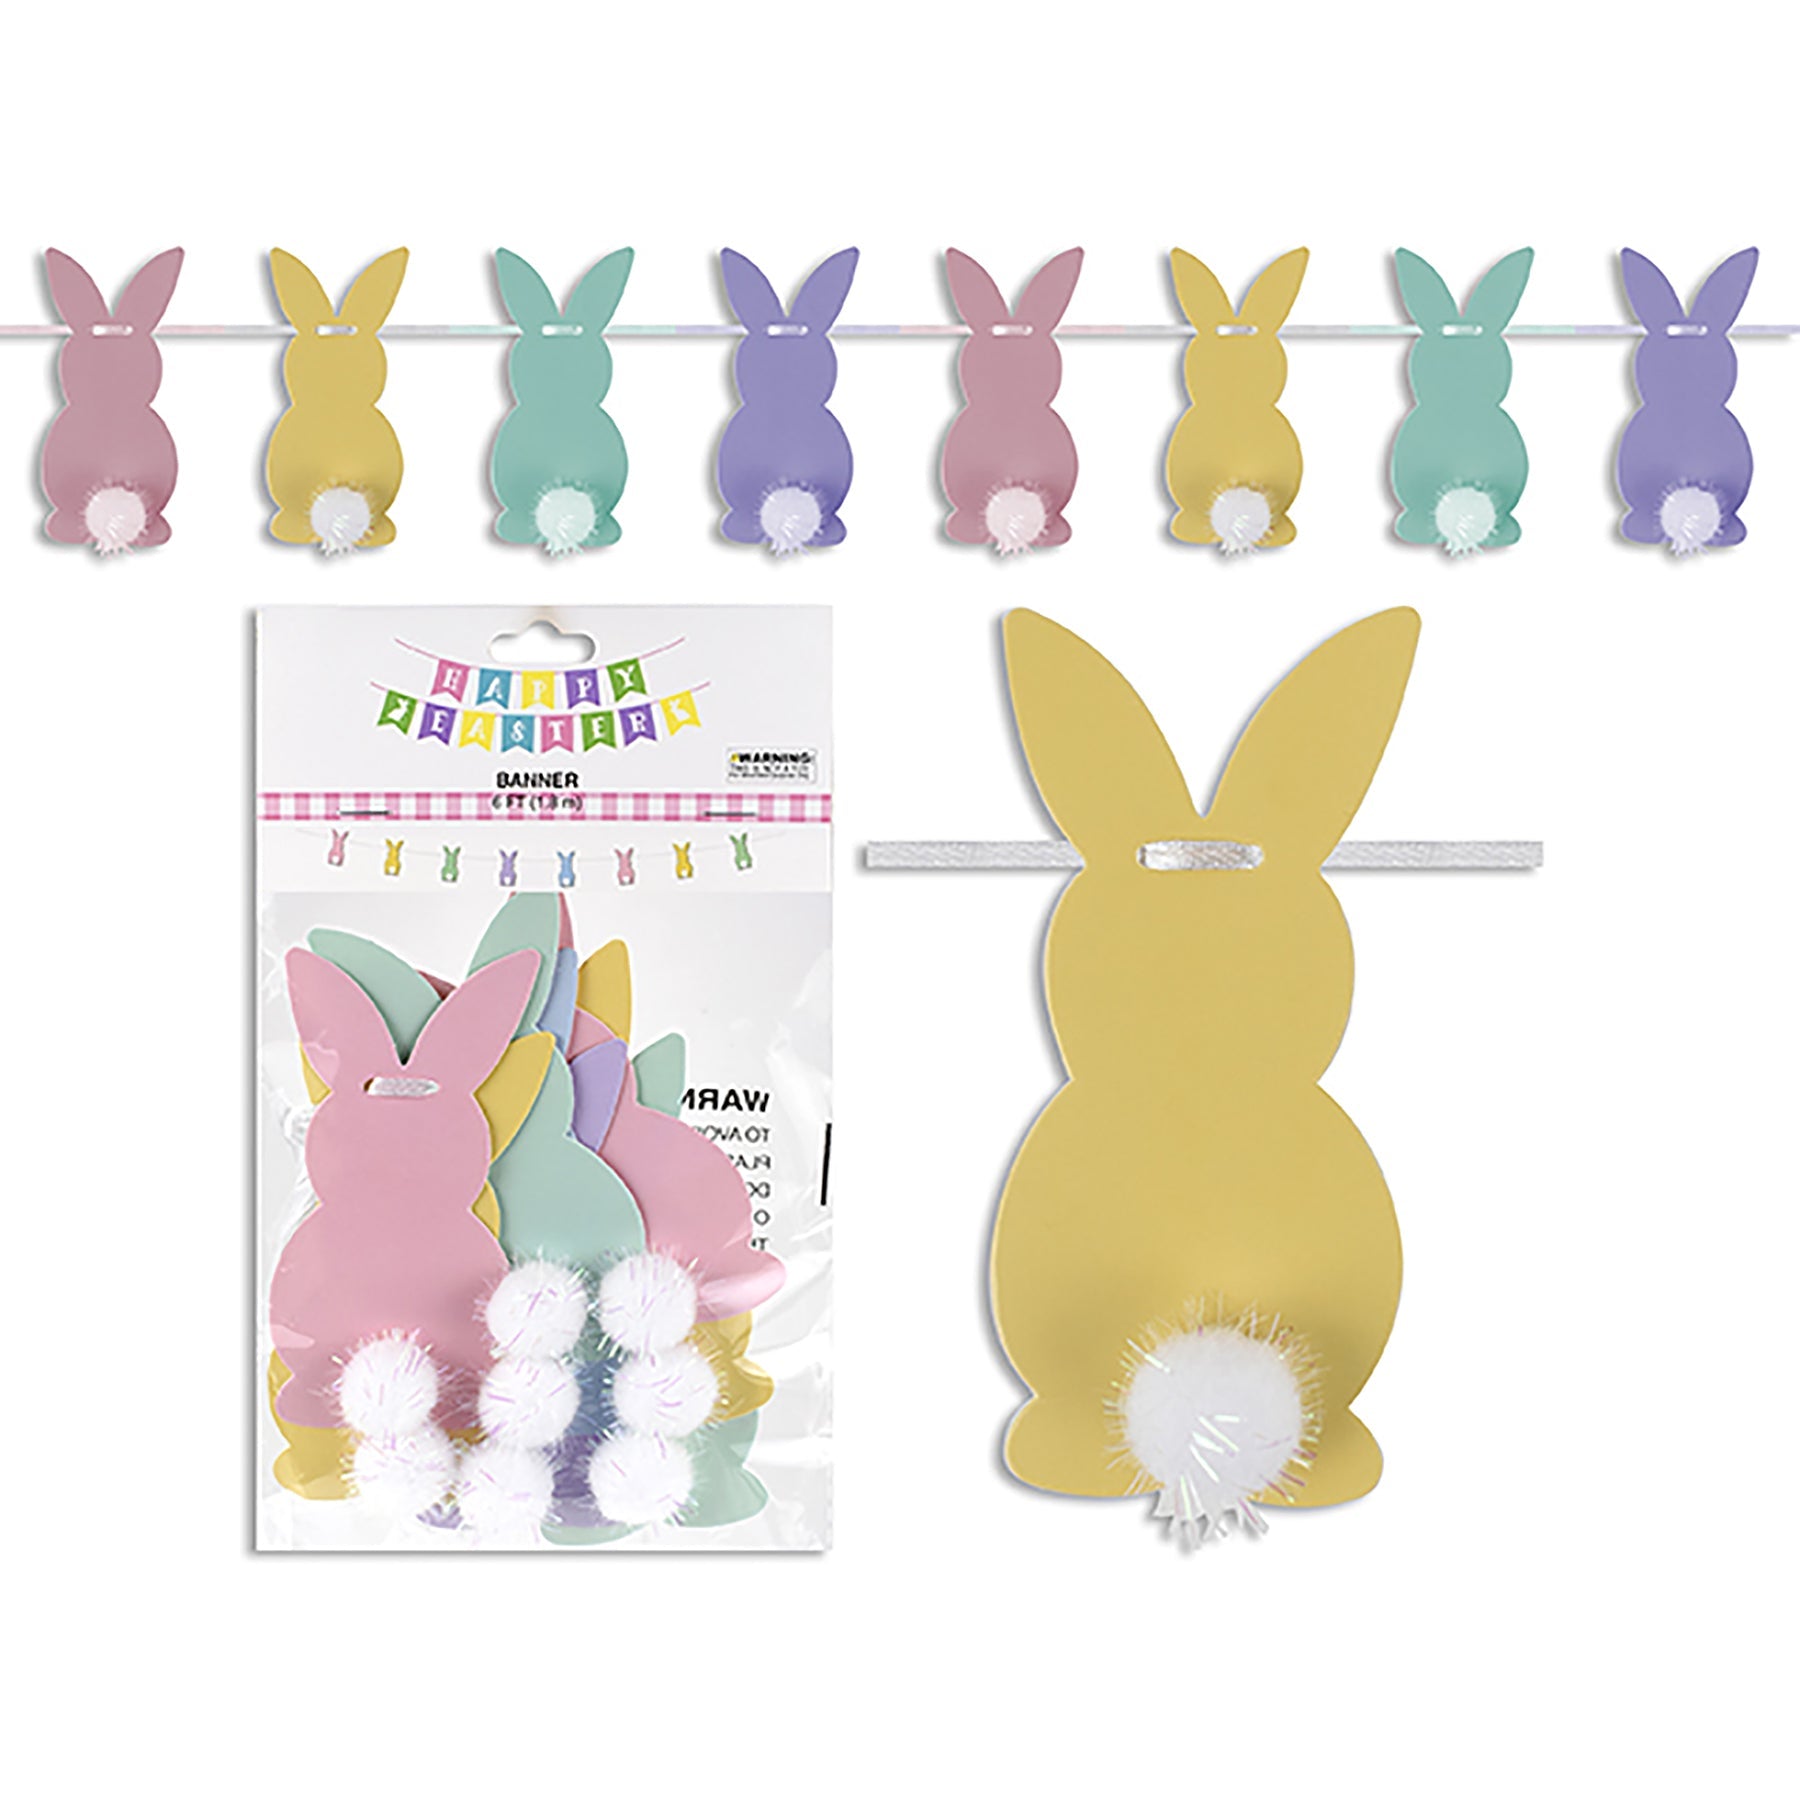 Easter 8 Die-Cut Bunnies with Tip-on Iridescent Pom Pom Tail Paper Garland 72in